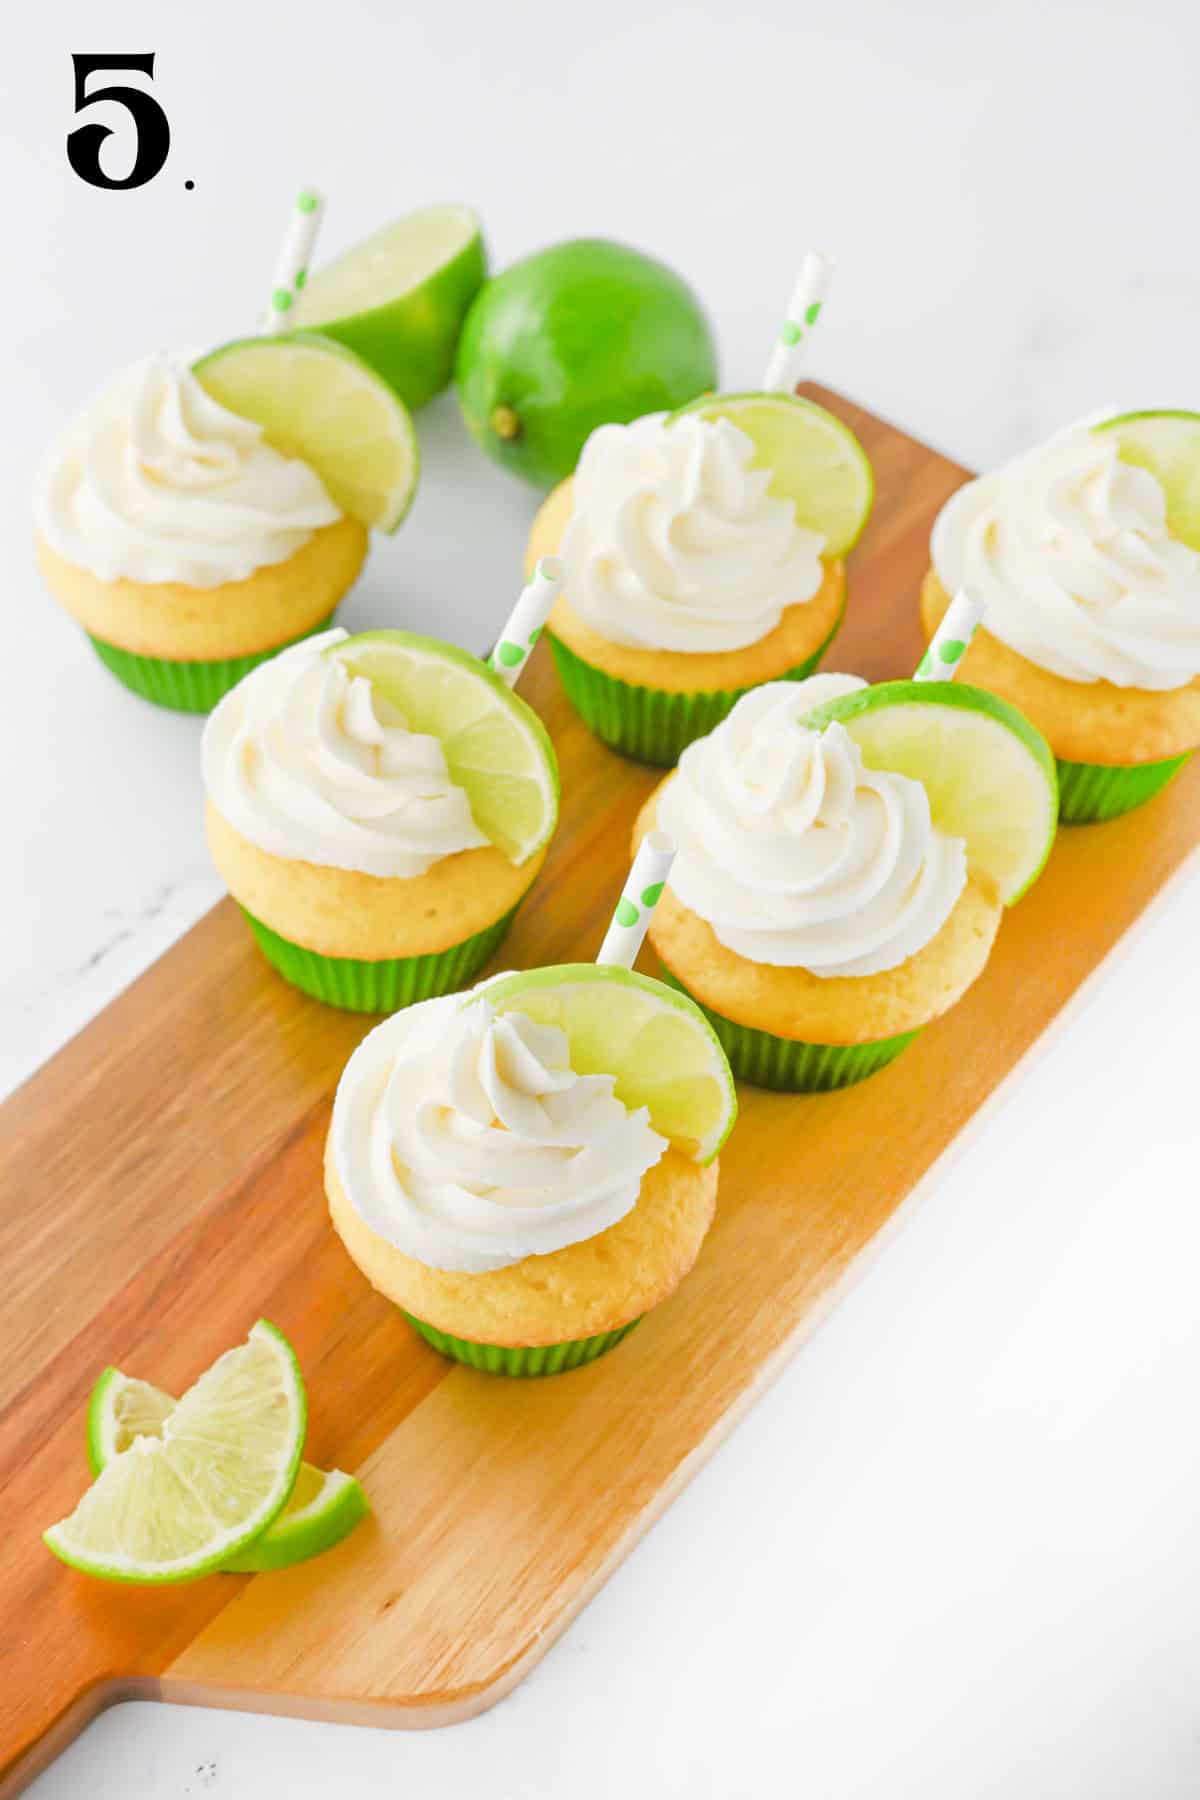 Tequila Margarita Cupcakes on board with lime.s